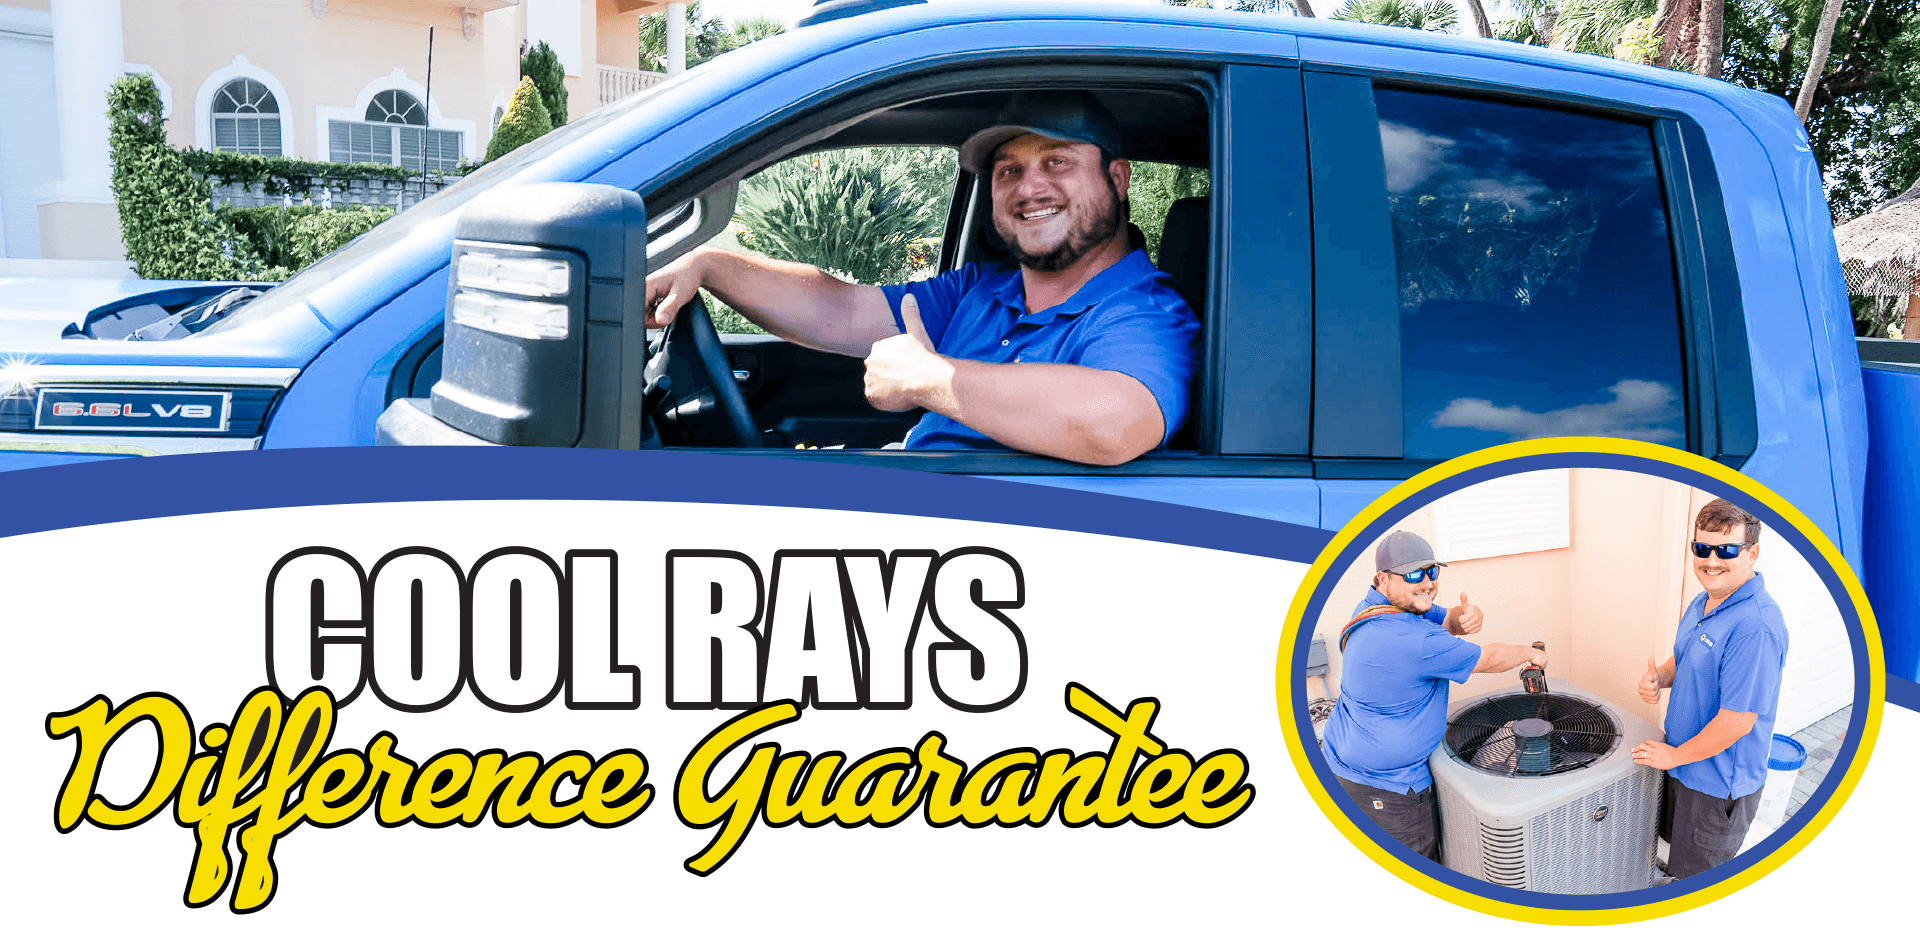 Cool Rays Difference Guarantee